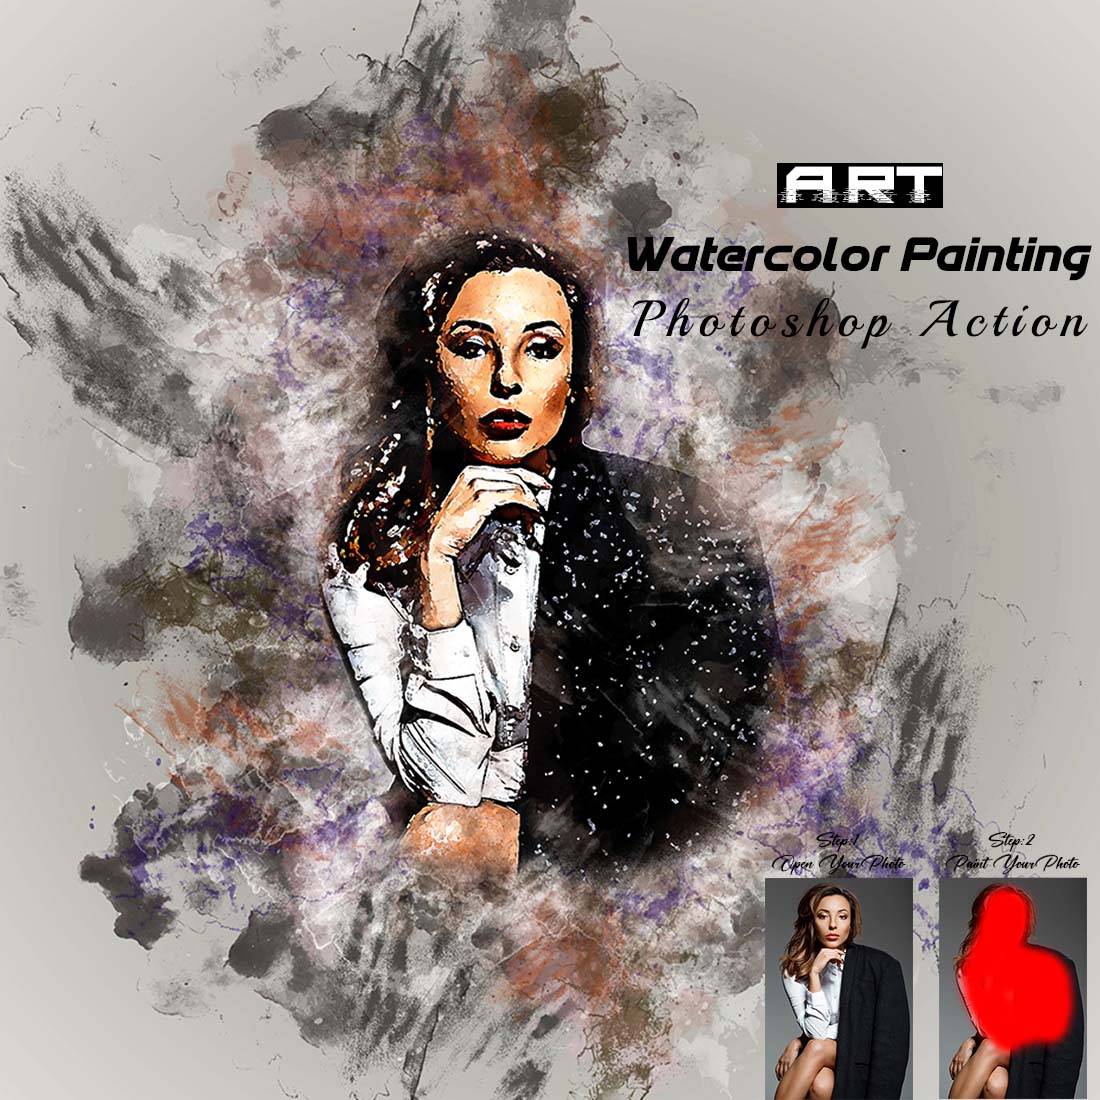 Art Watercolor Painting Photoshop Action cover image.